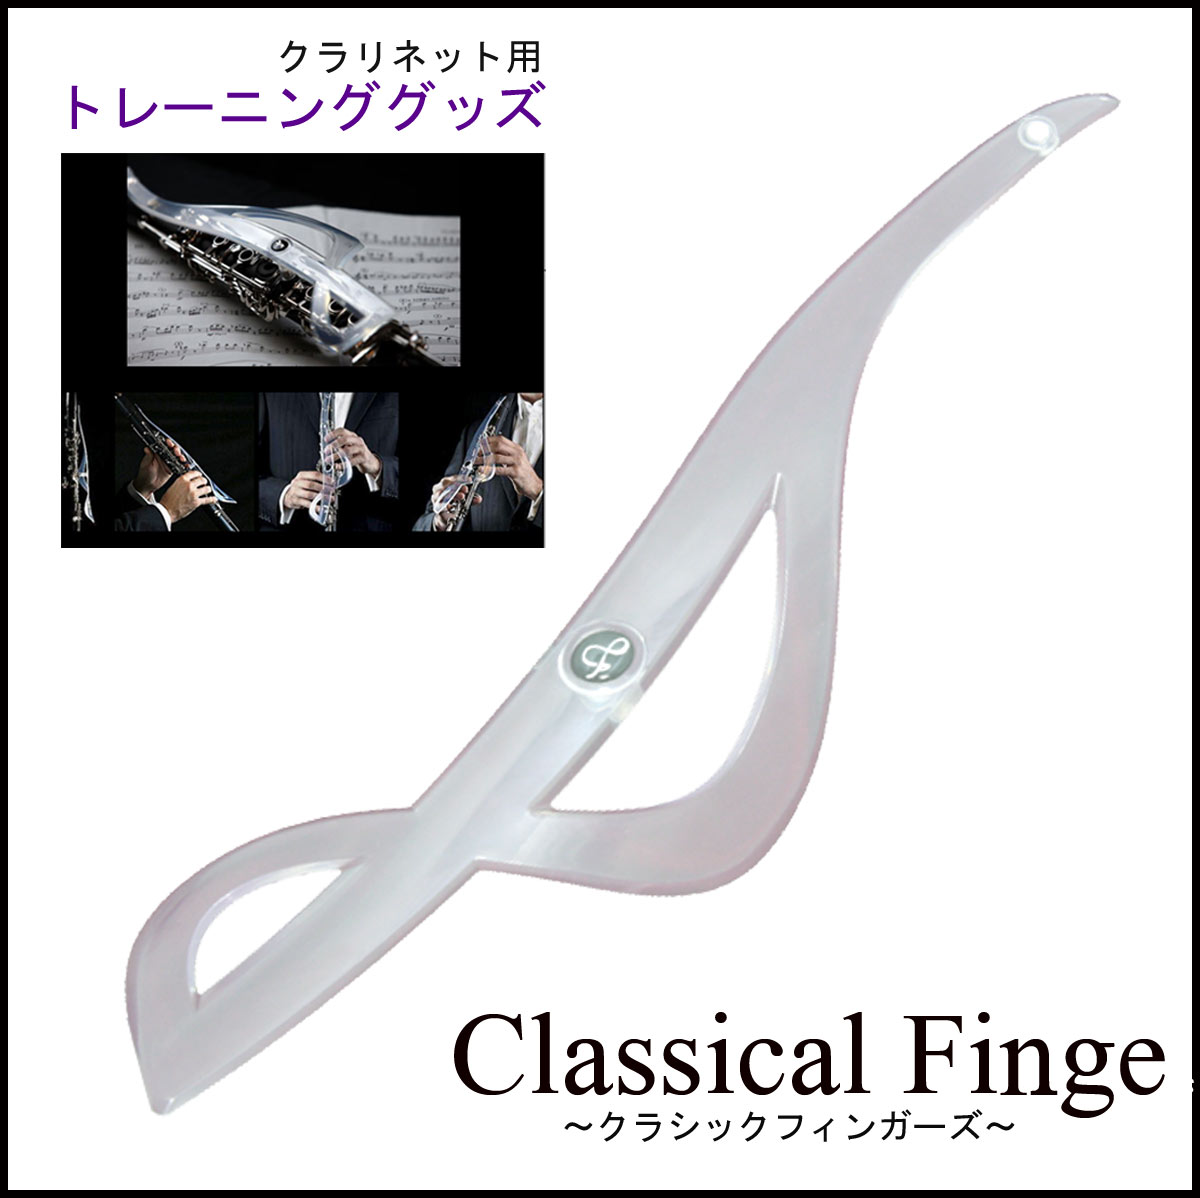 Cloud break Music / Classical Fingers クラシカルフィンガーズ クラリネット運指矯正グッズ